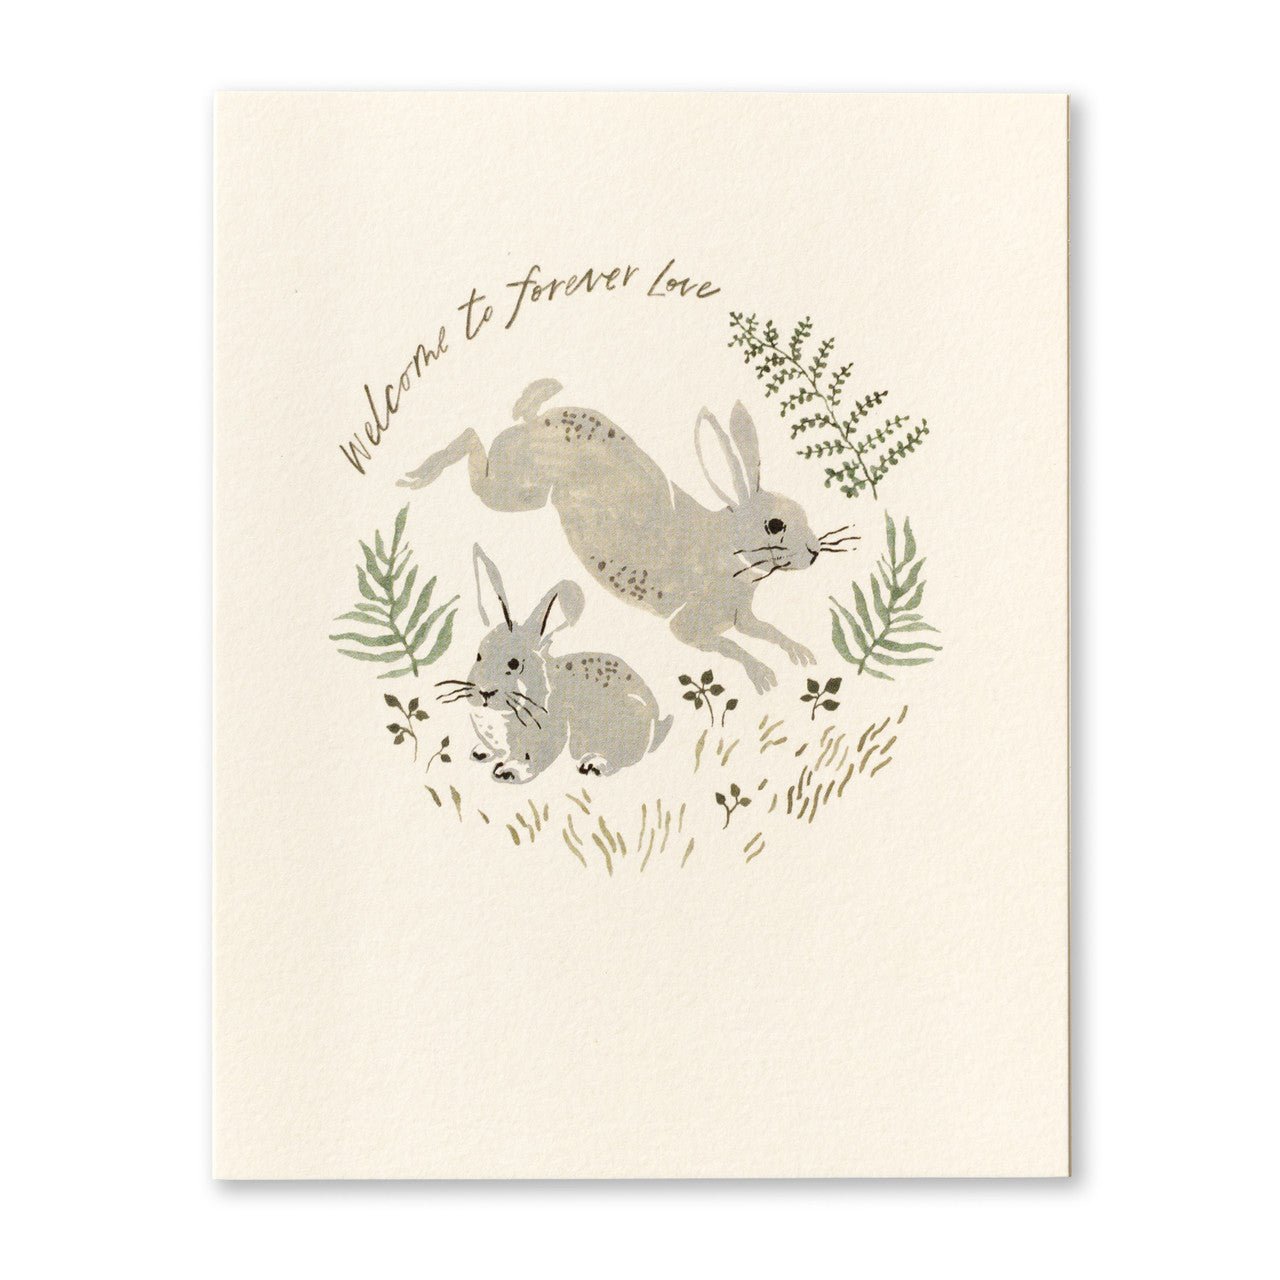 Welcome To Forever Love Card - Wren Harper